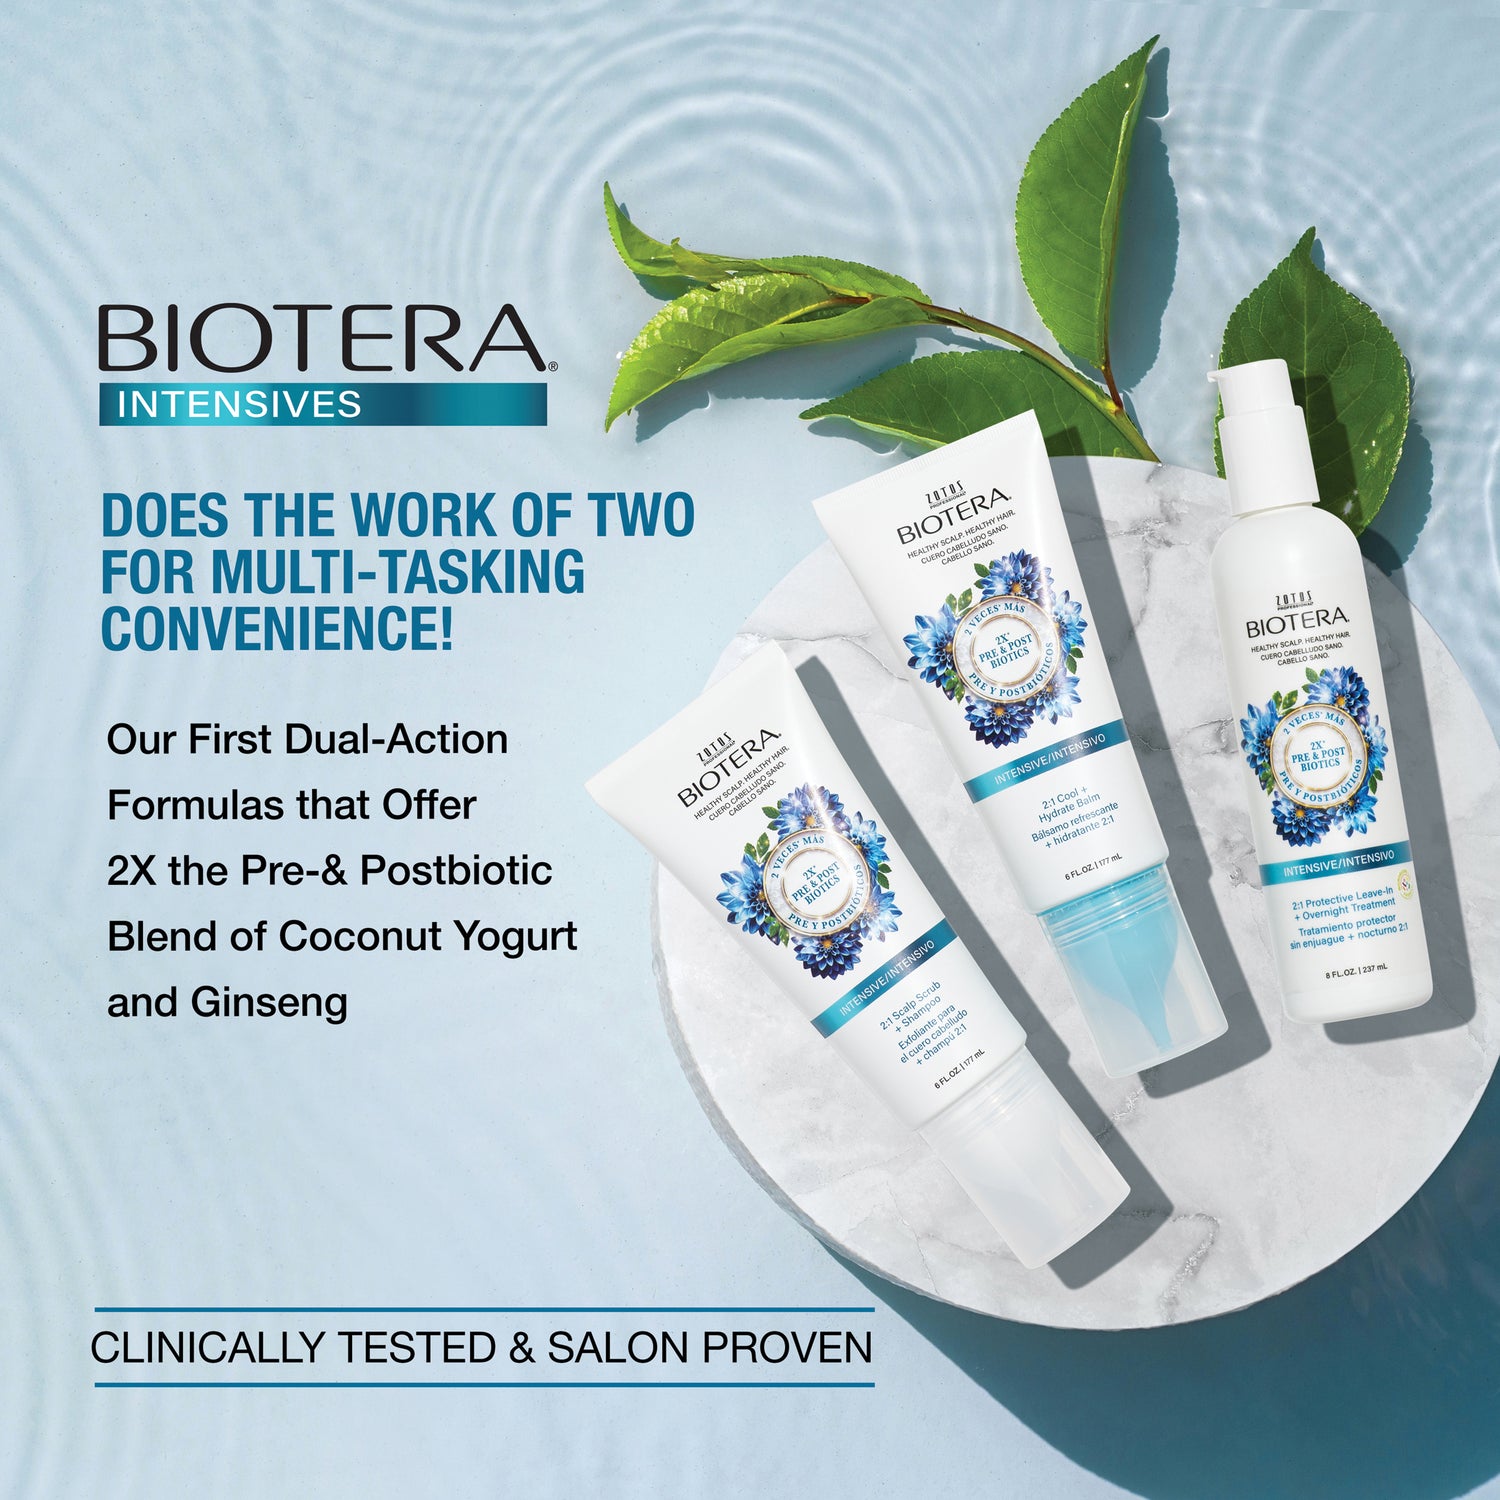 Does the work of two for multi-tasking convenience! Our first dual-action formulas that offer 2 times the pre and postbiotic blend of coconut yogurt and ginseng. Clinically tested and salon proven.